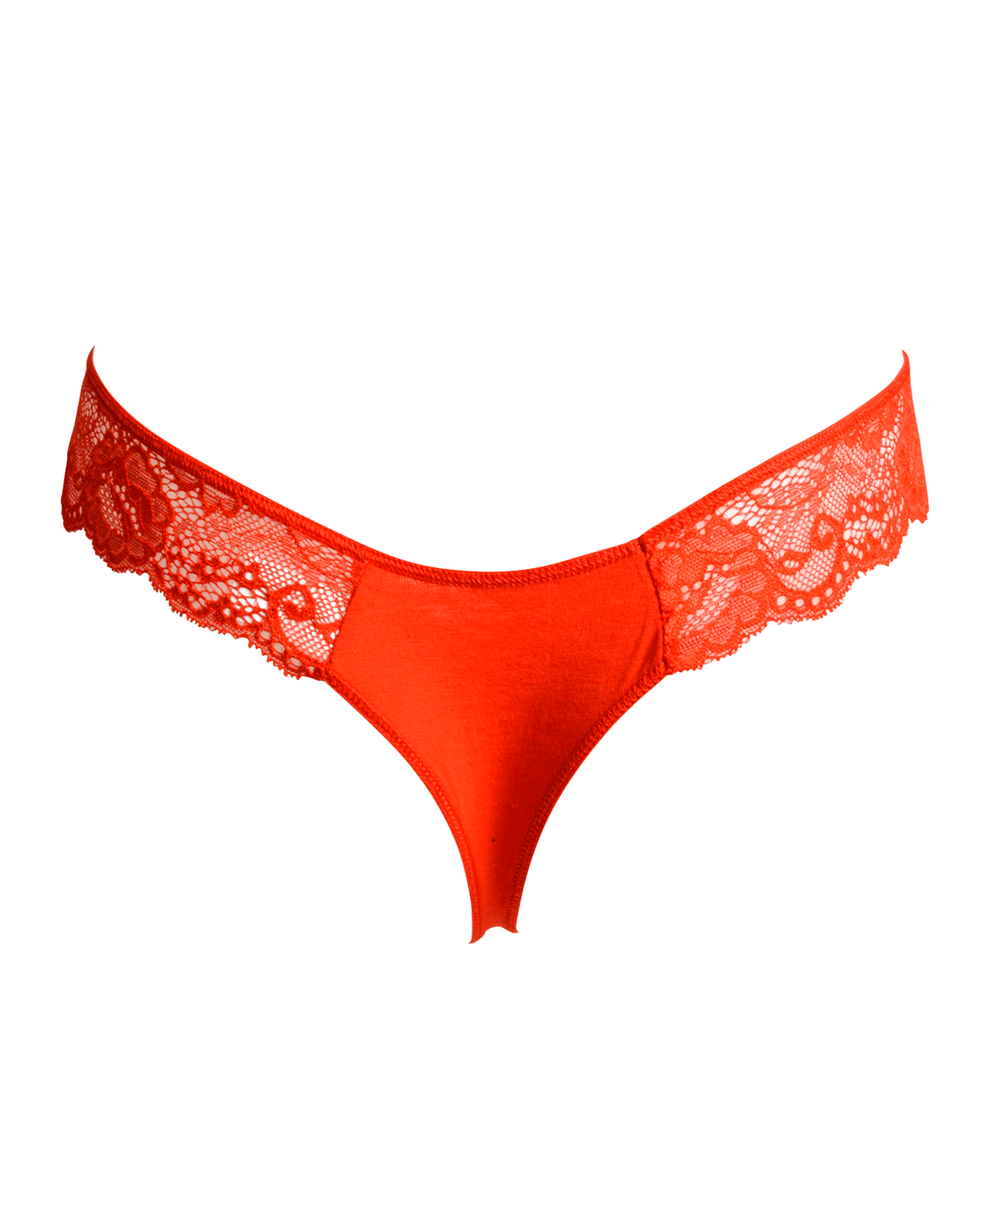 Vision Chic Lace Thong